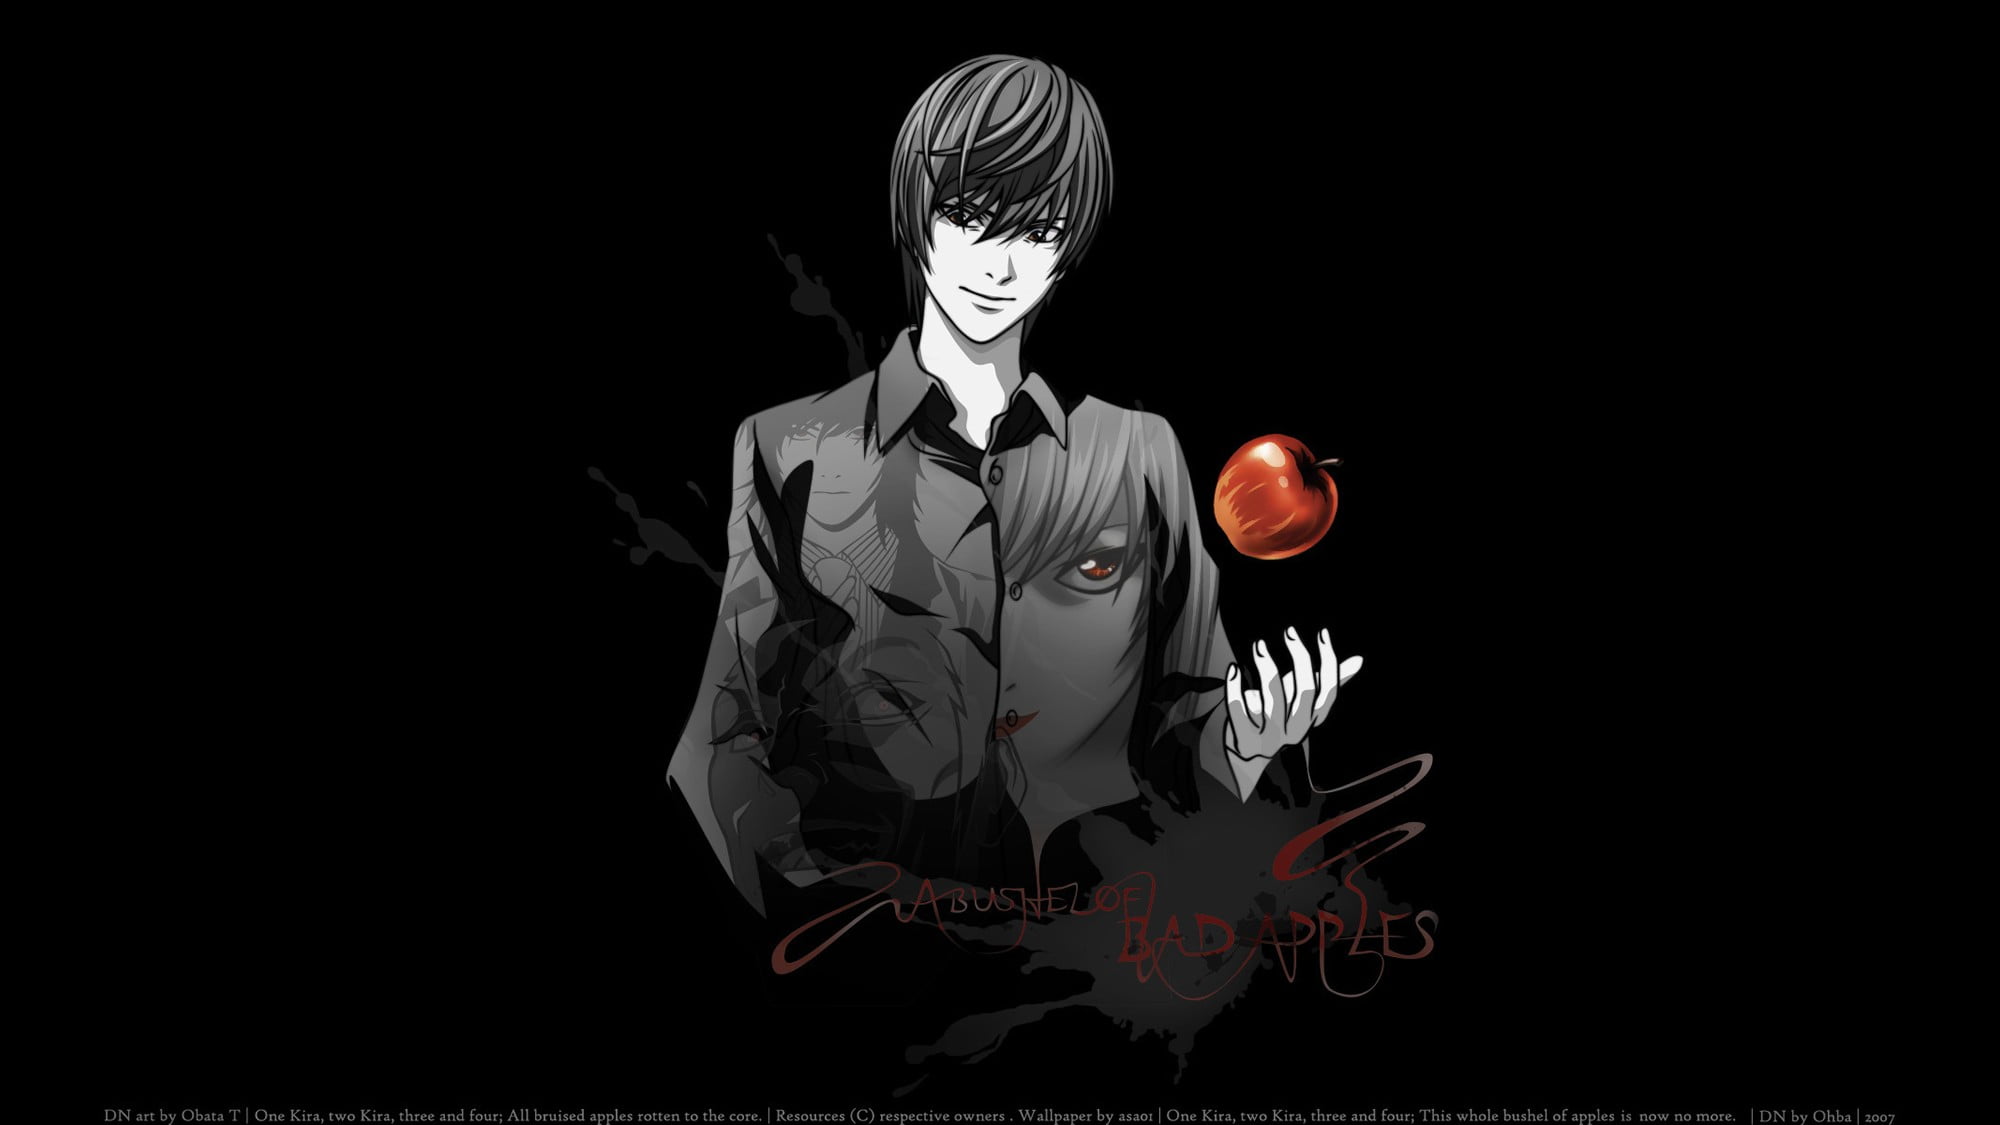 male anime character illustration, Death Note, anime, apples